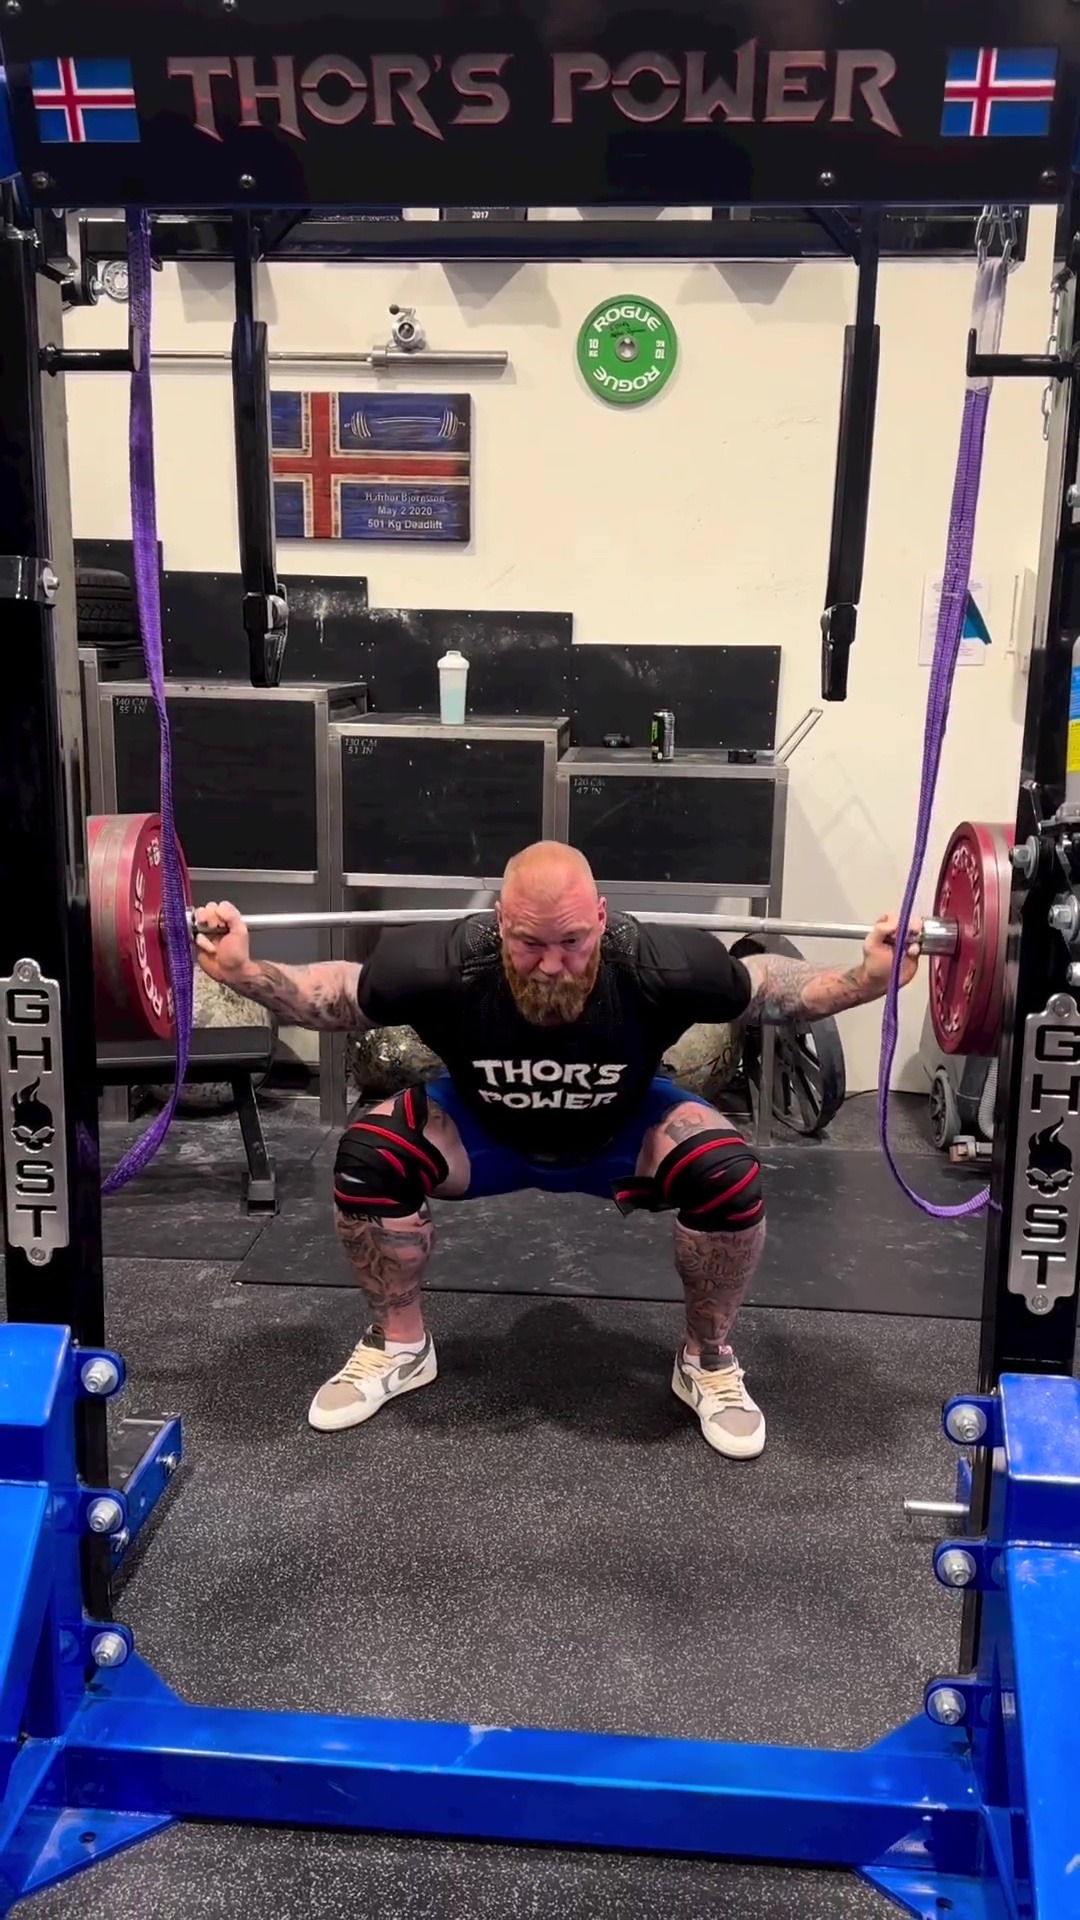 , Giant Game of Thrones star and boxer Hafthor Bjornsson comes out of retirement and looks to break all-time record